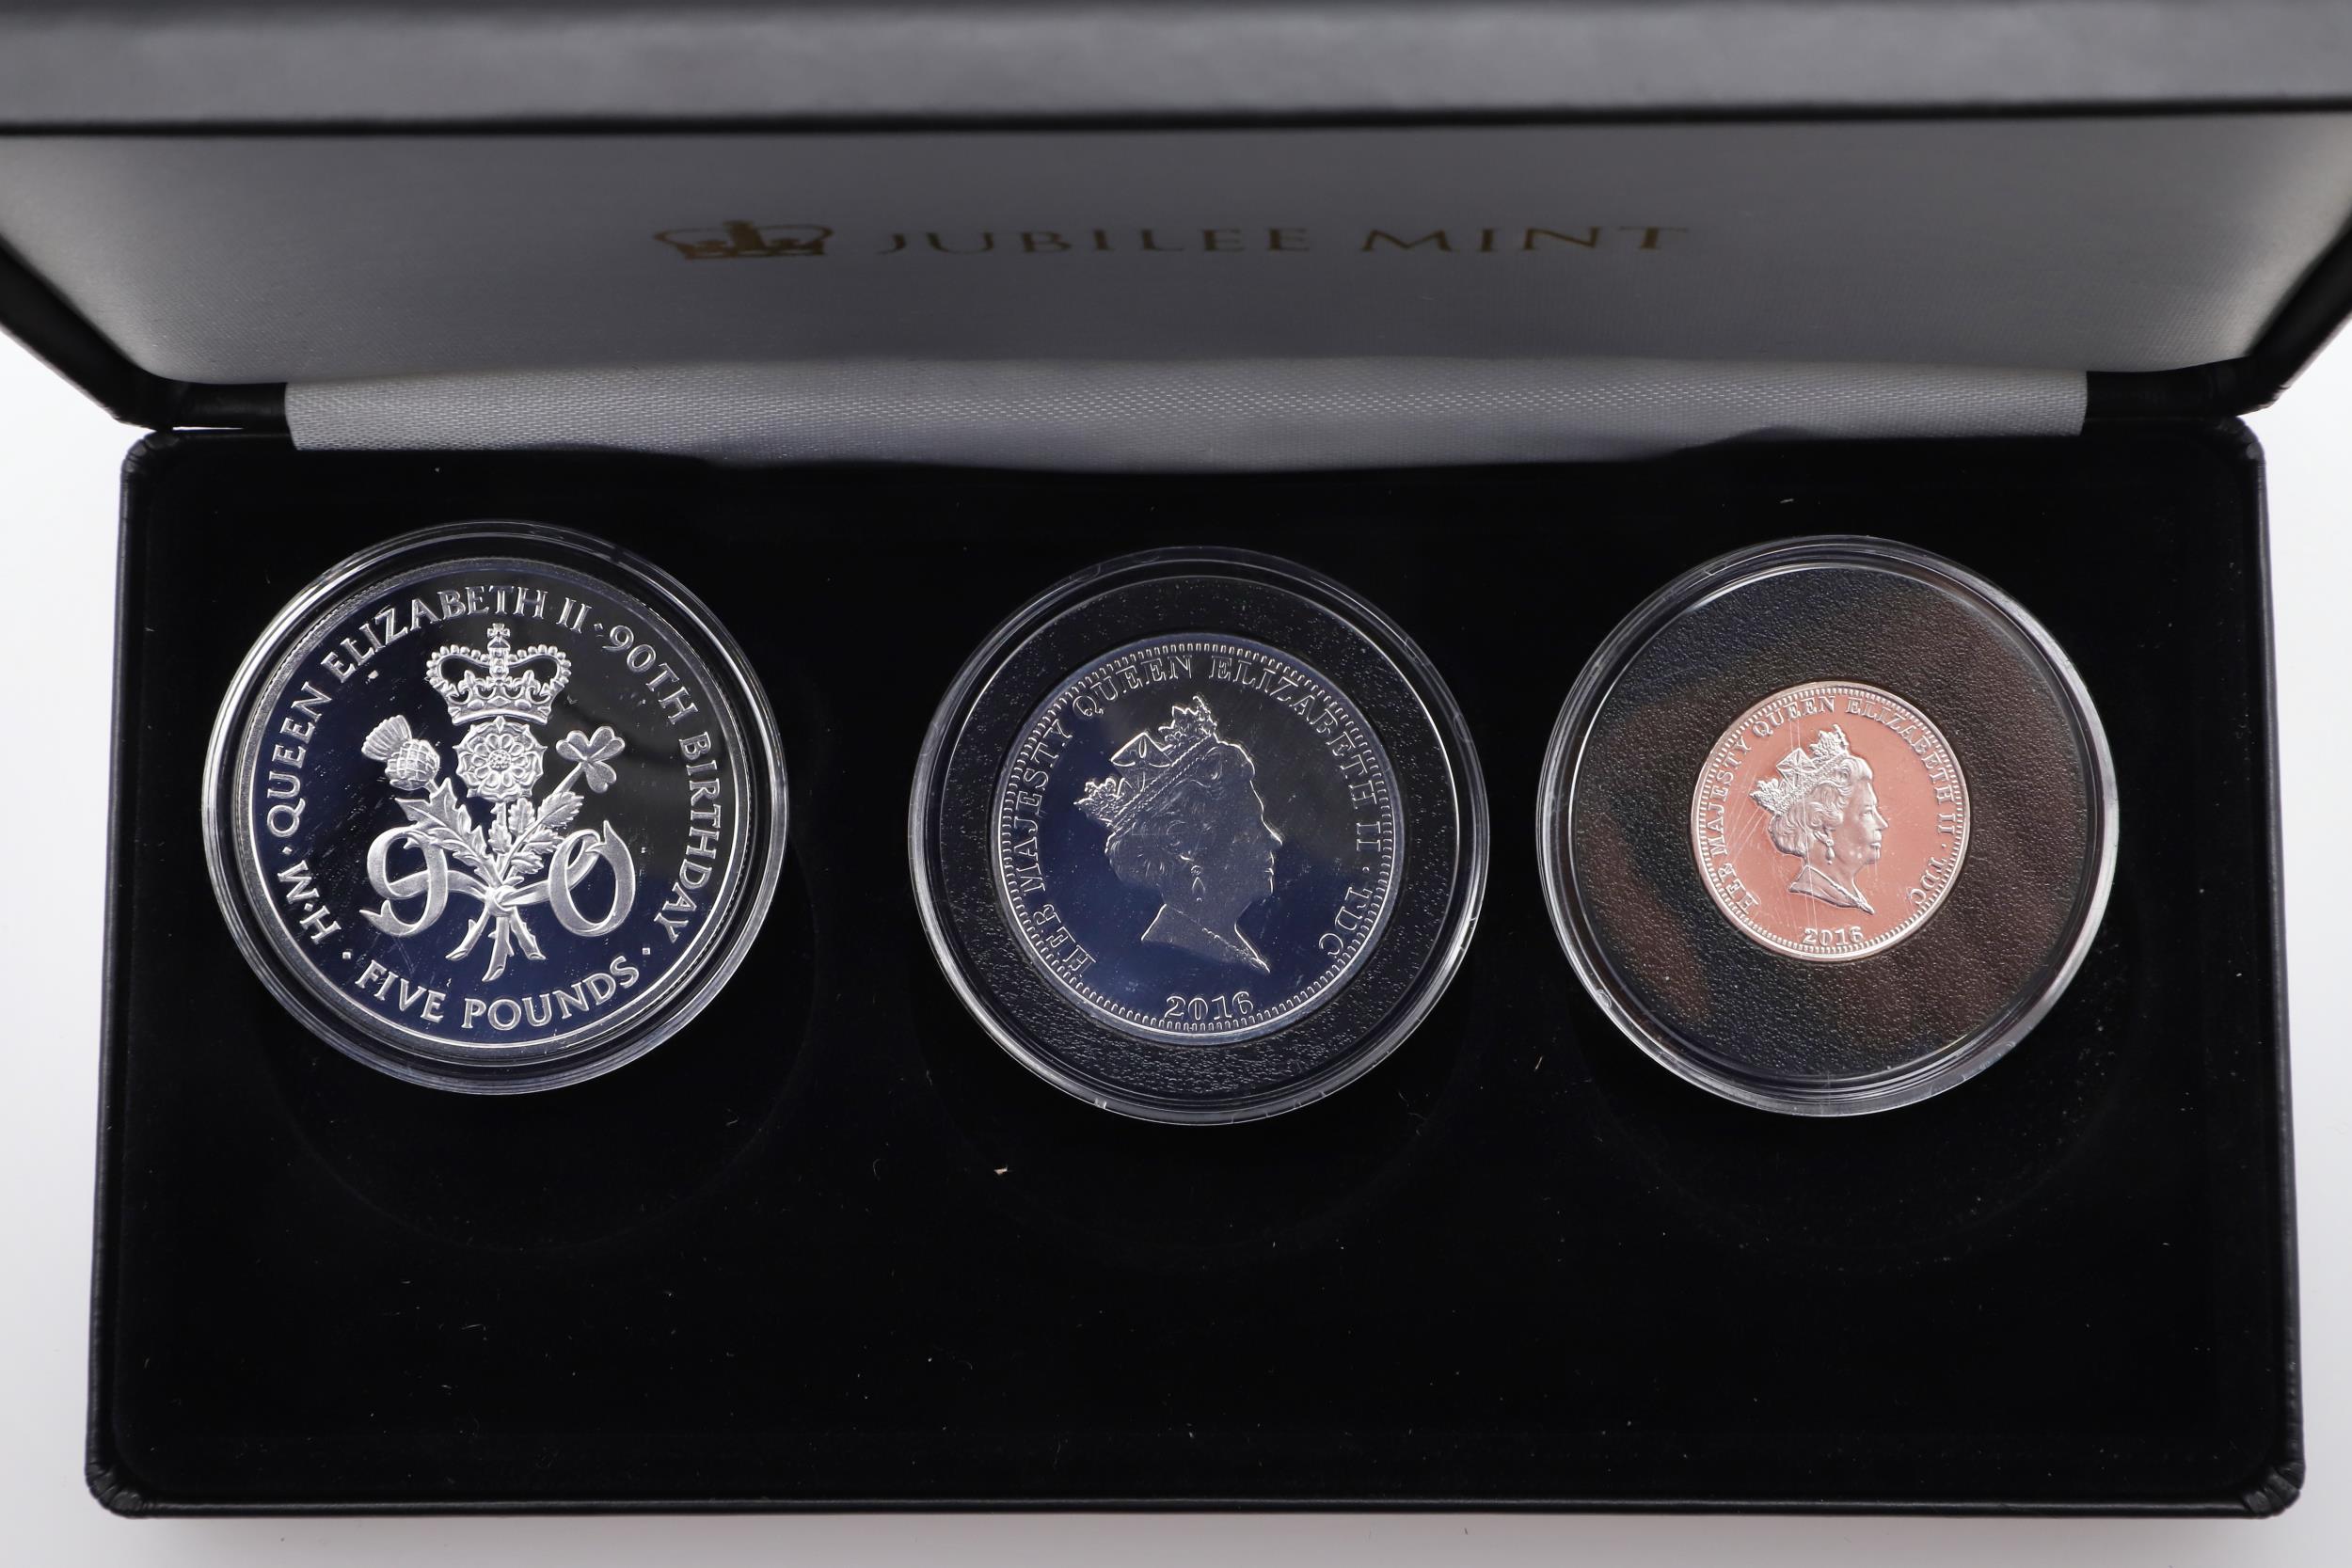 THREE JUBILEE MINT THREE COIN SILVER PROOF ROYALTY THEMED ISSUES, 2014, 2016 AND 2018. - Image 10 of 10